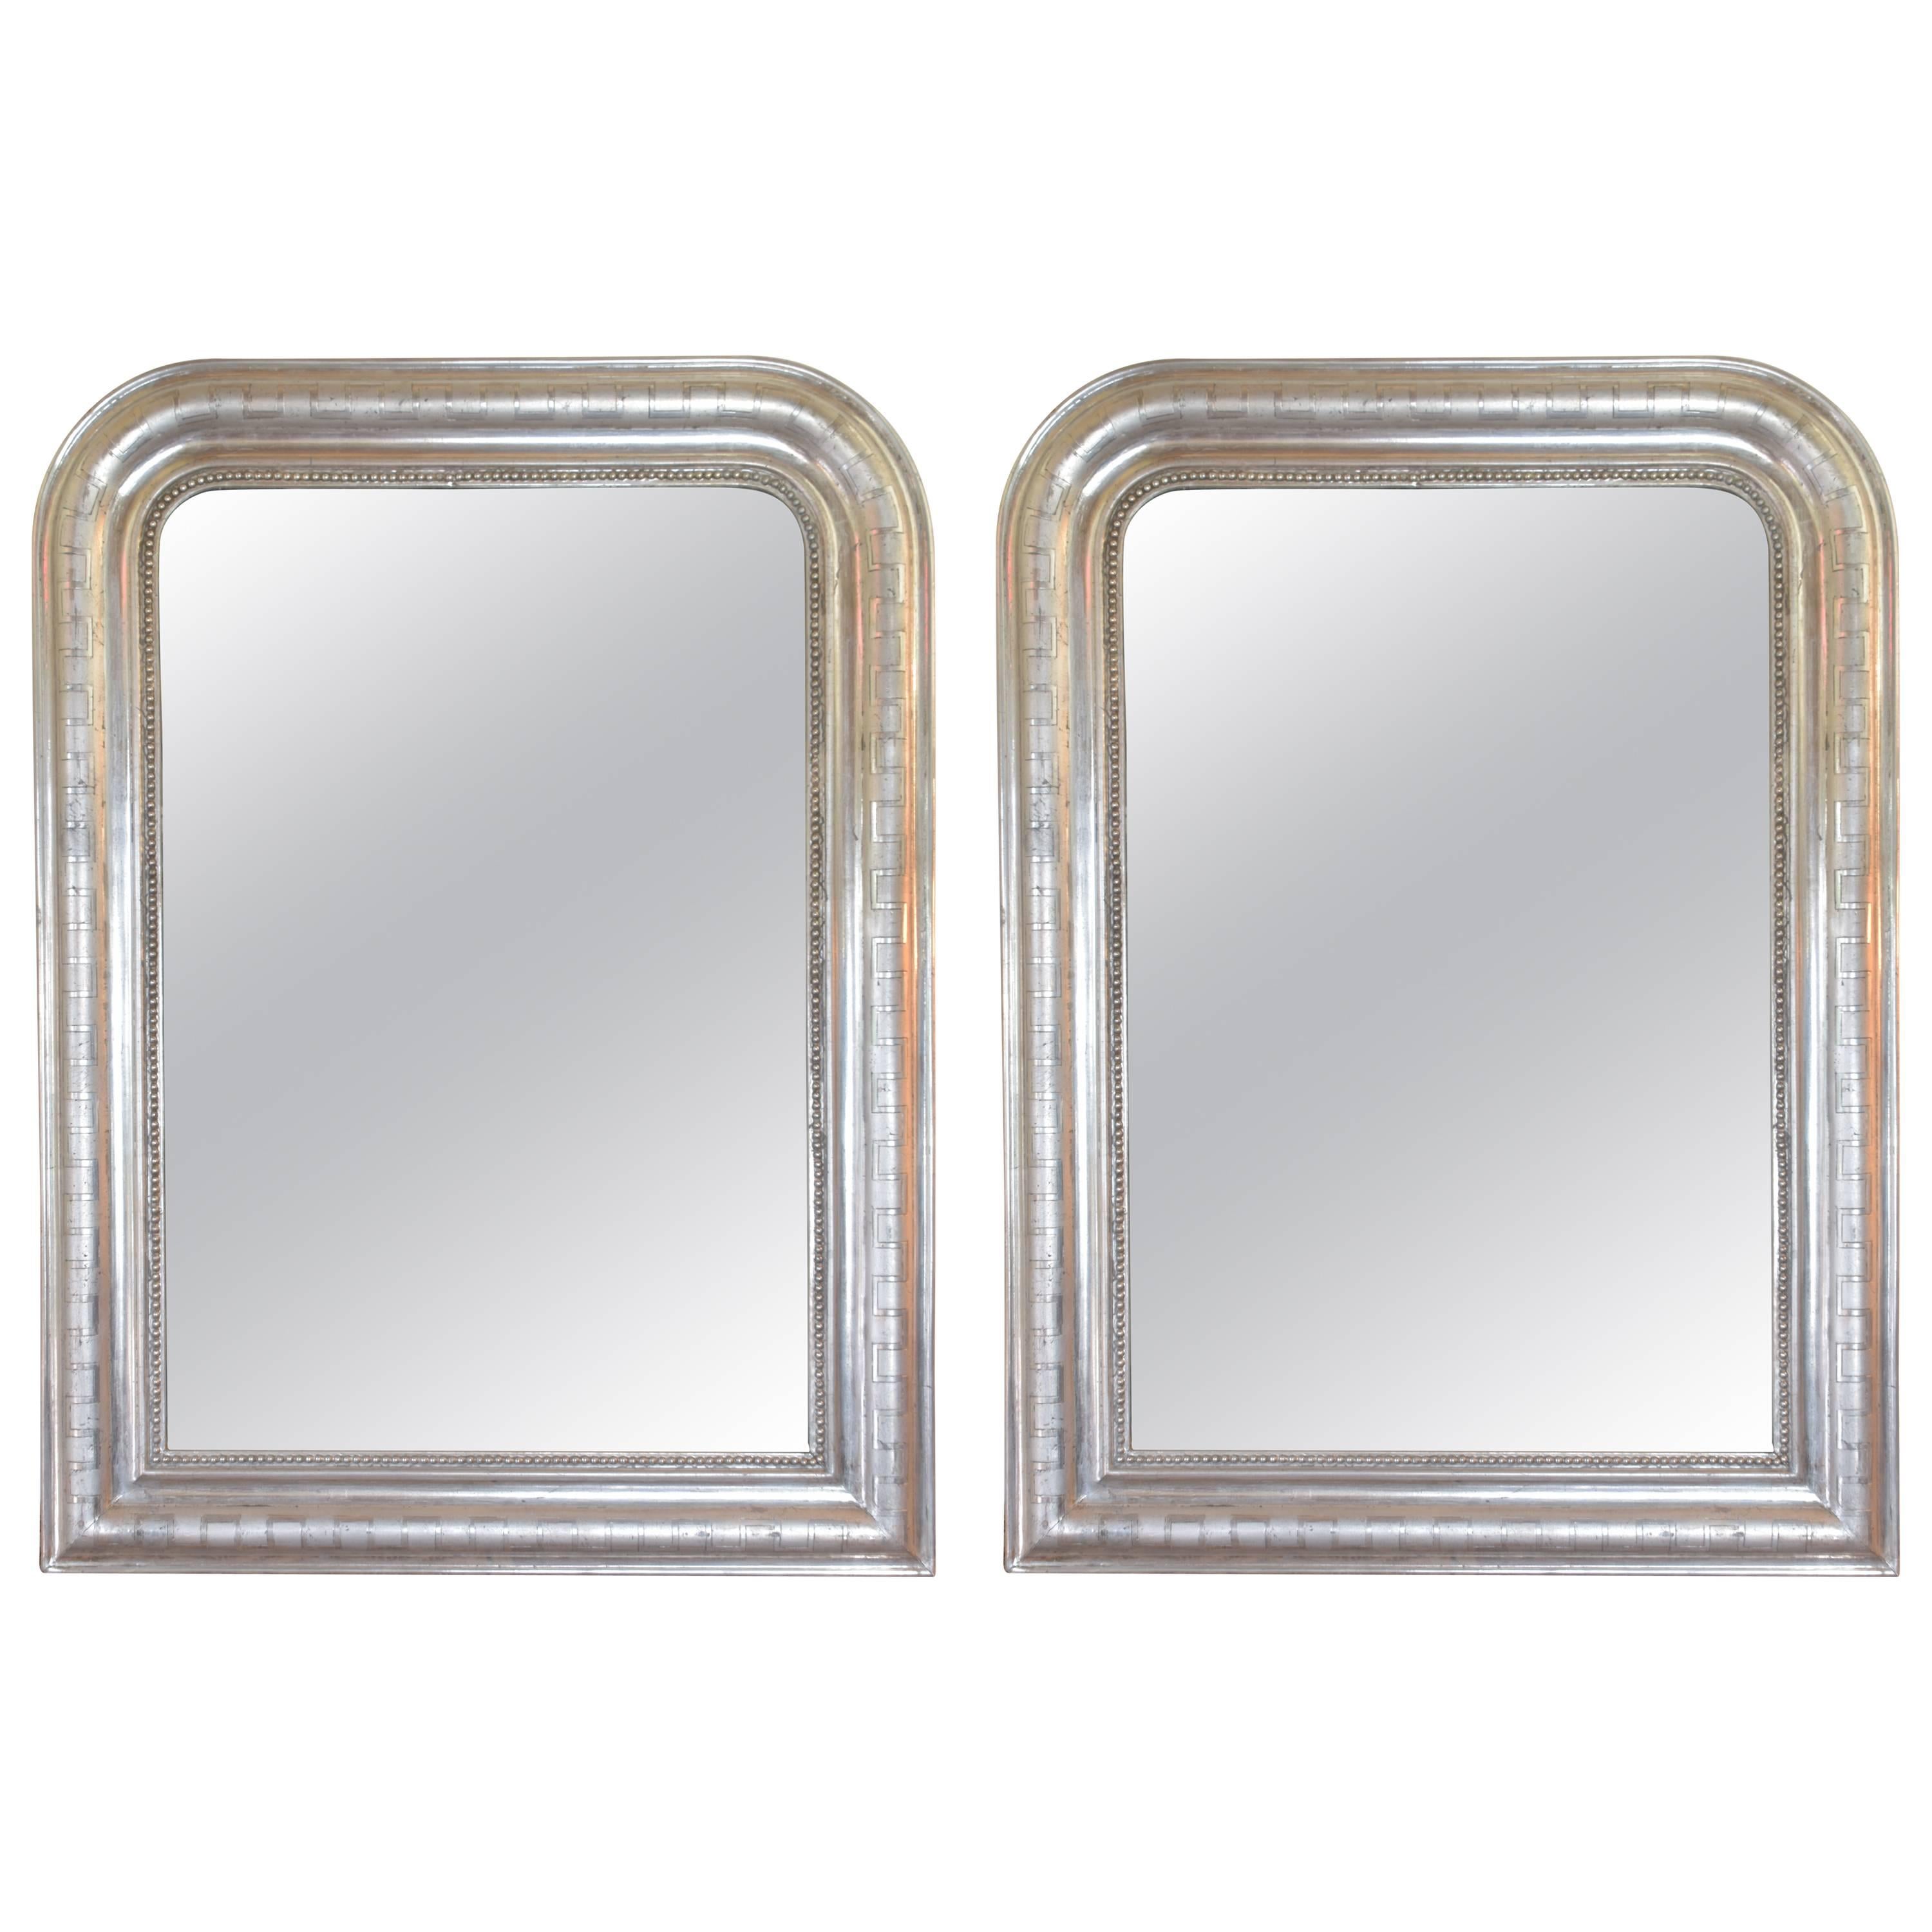 Near Pair of Silver Louis Phillippe Mirrors